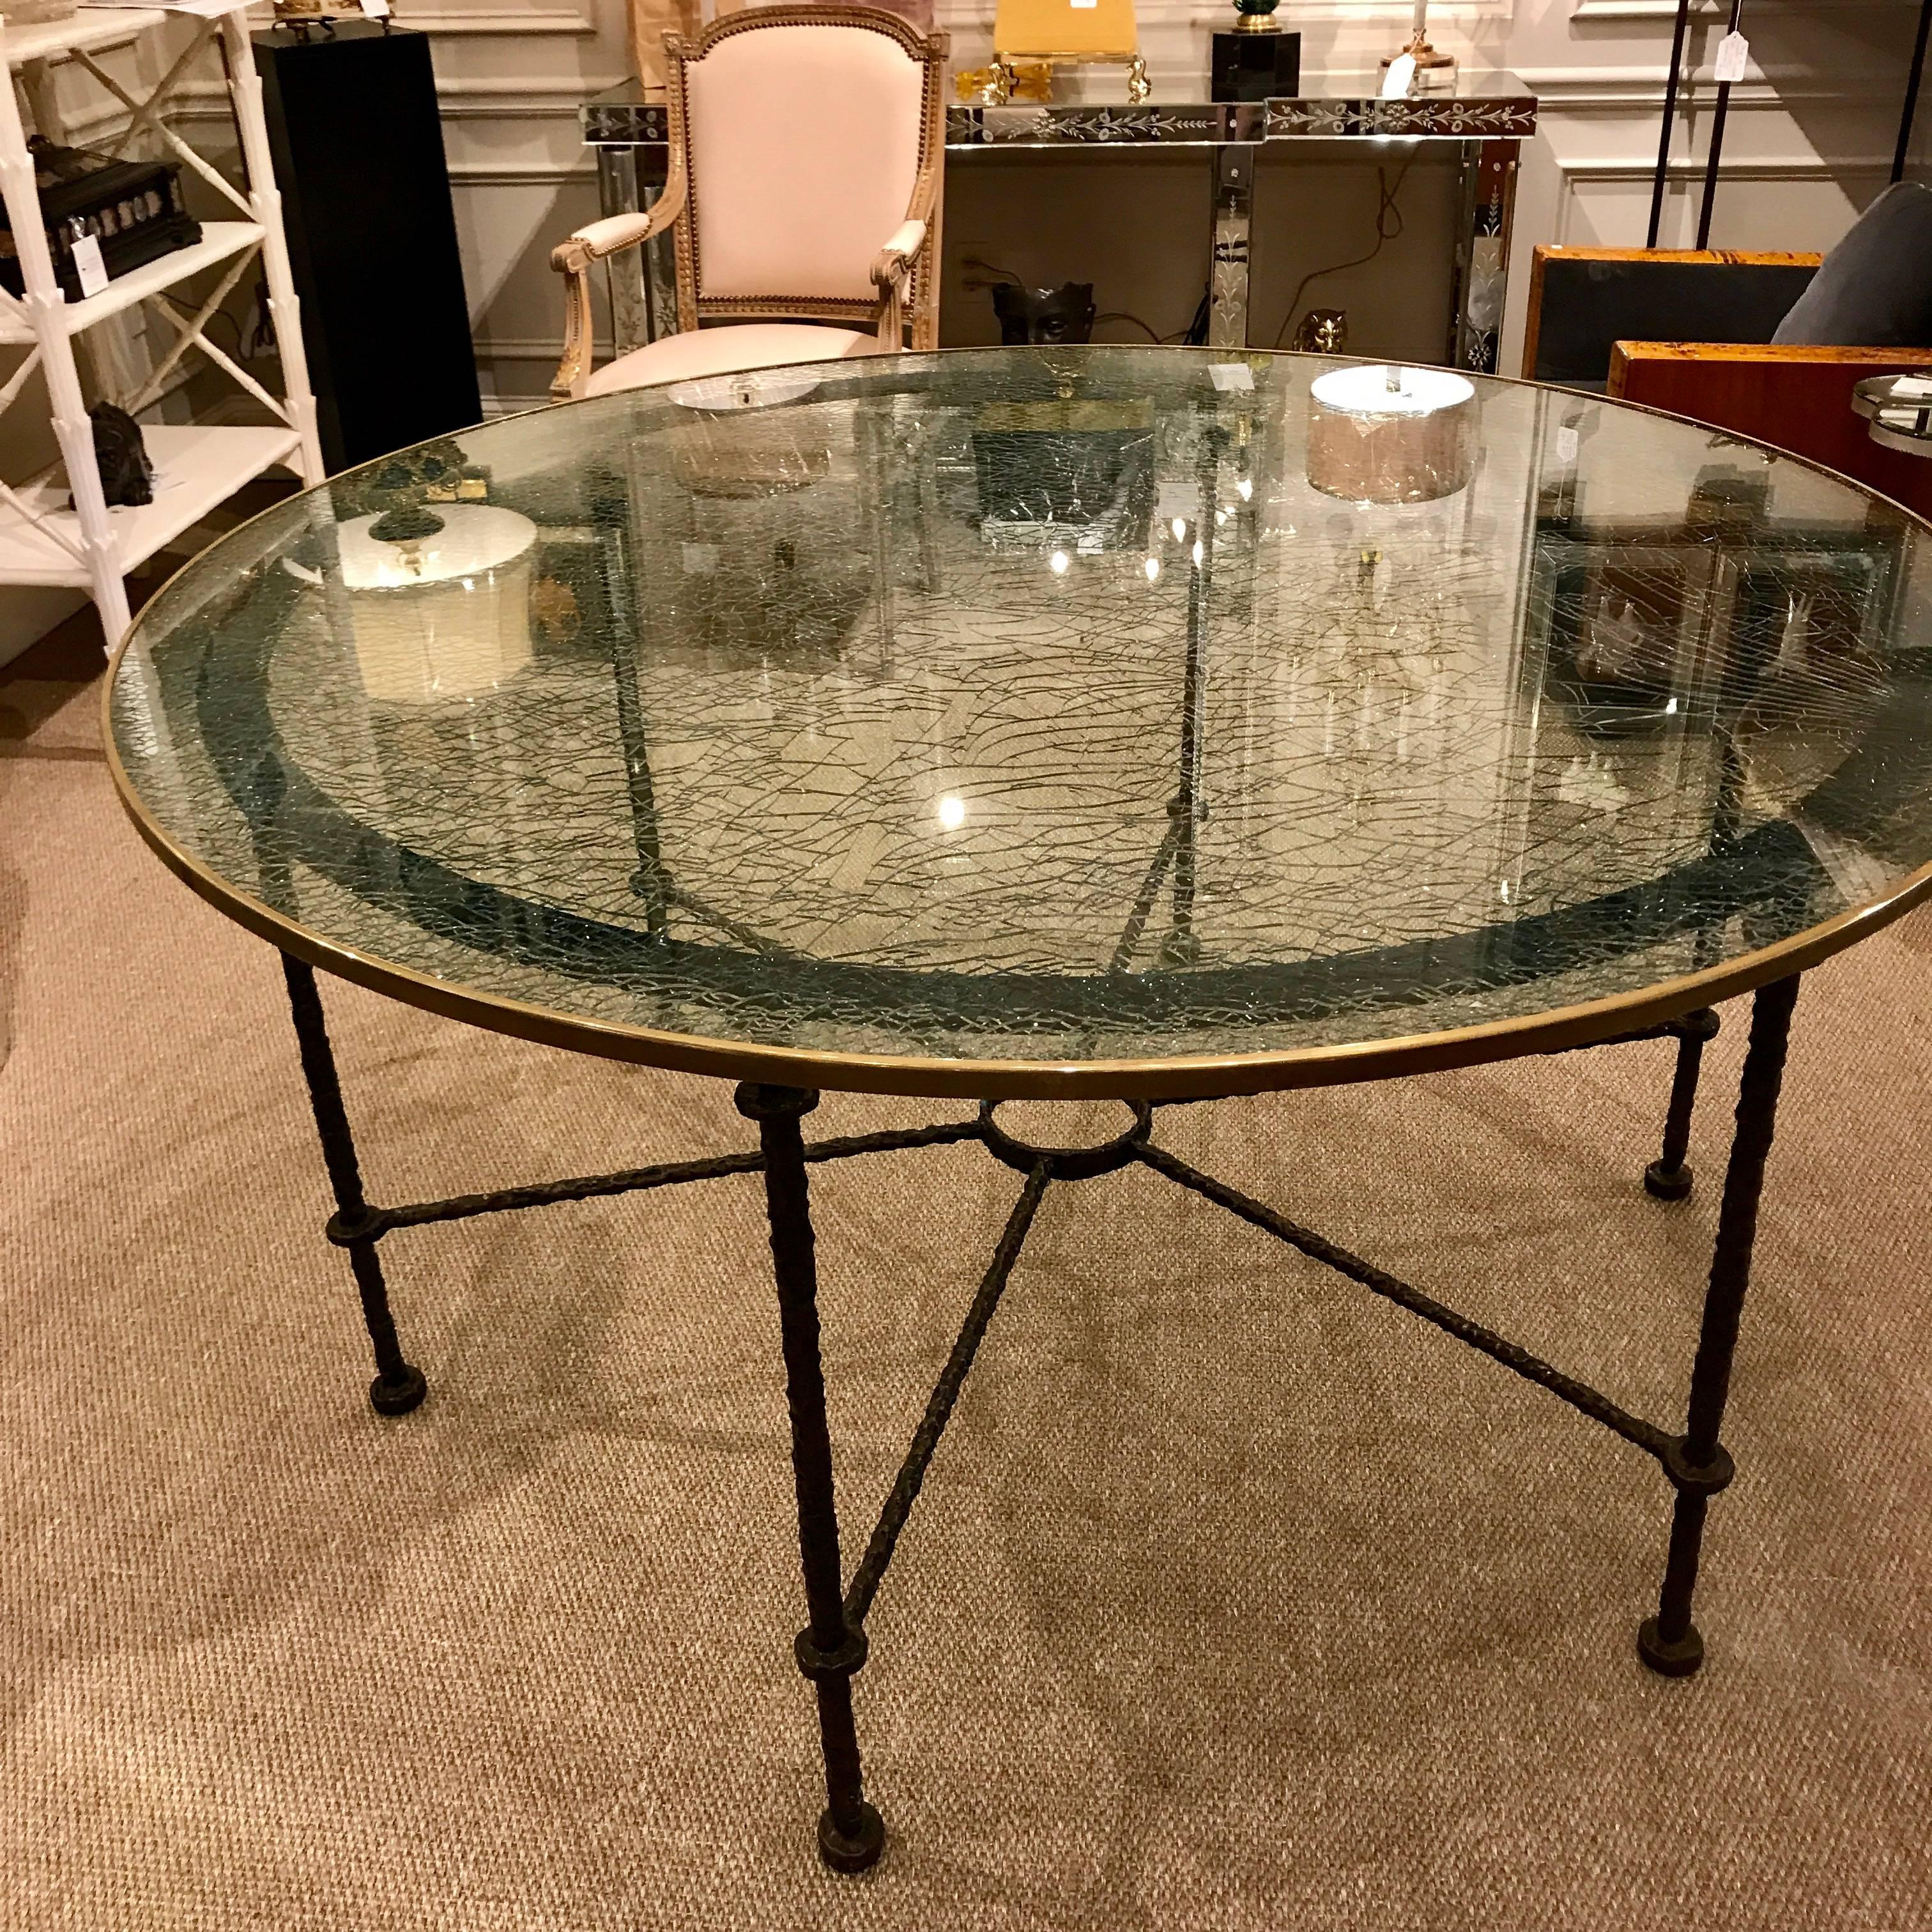 Giacometti style bronze dining table. A magnificent 59" diameter bronze-mounted crackle/ fractured circular glass top resting on a cast bronze six legged Giacometti style table base from the NJ estate of R & B legend Luther Vandross.